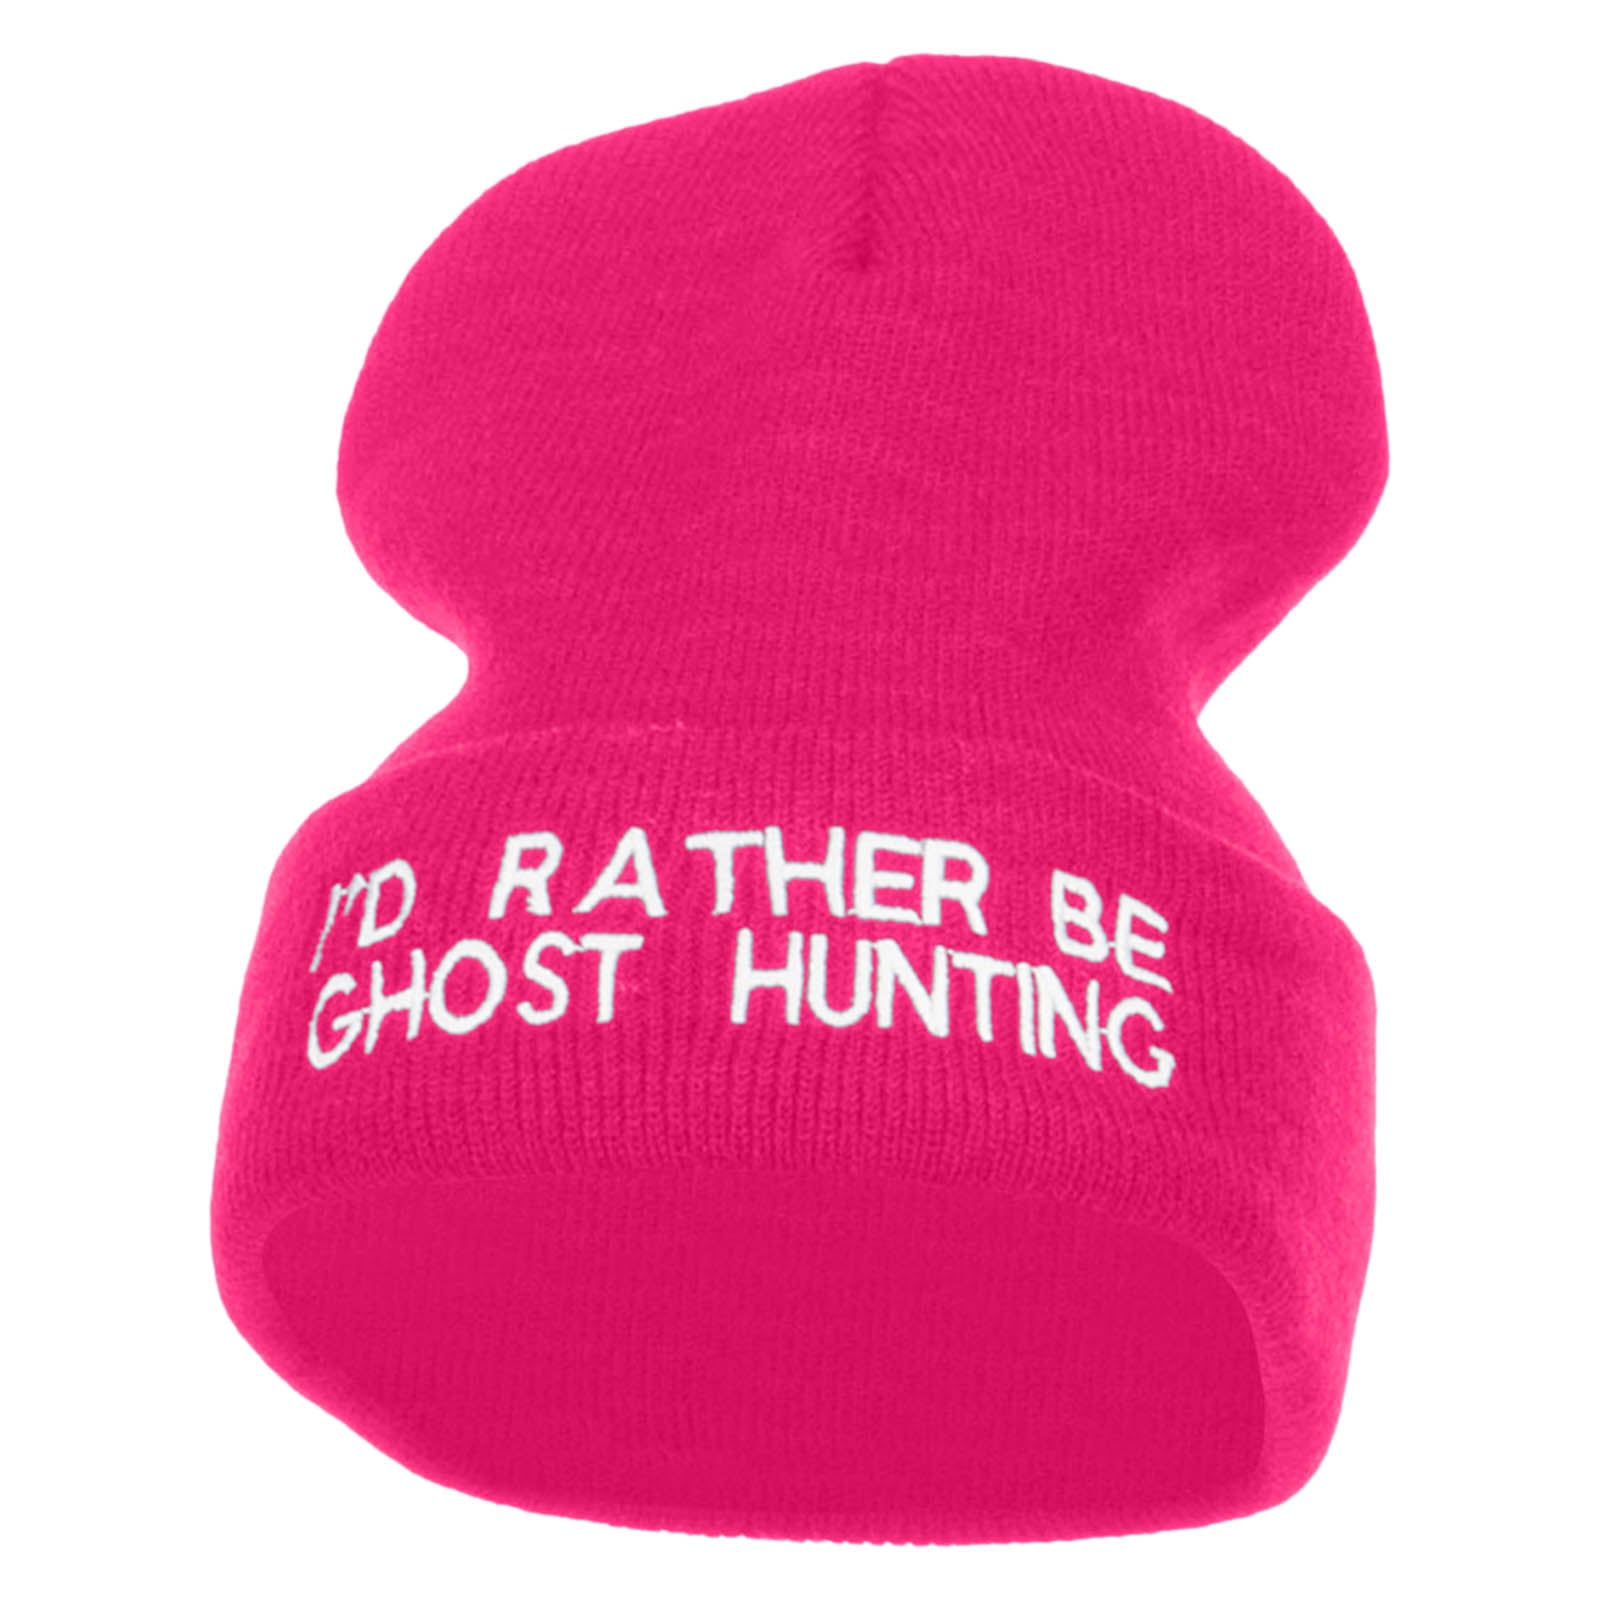 I&#039;d Rather Be Ghost Hunting Long Beanie - Magenta OSFM